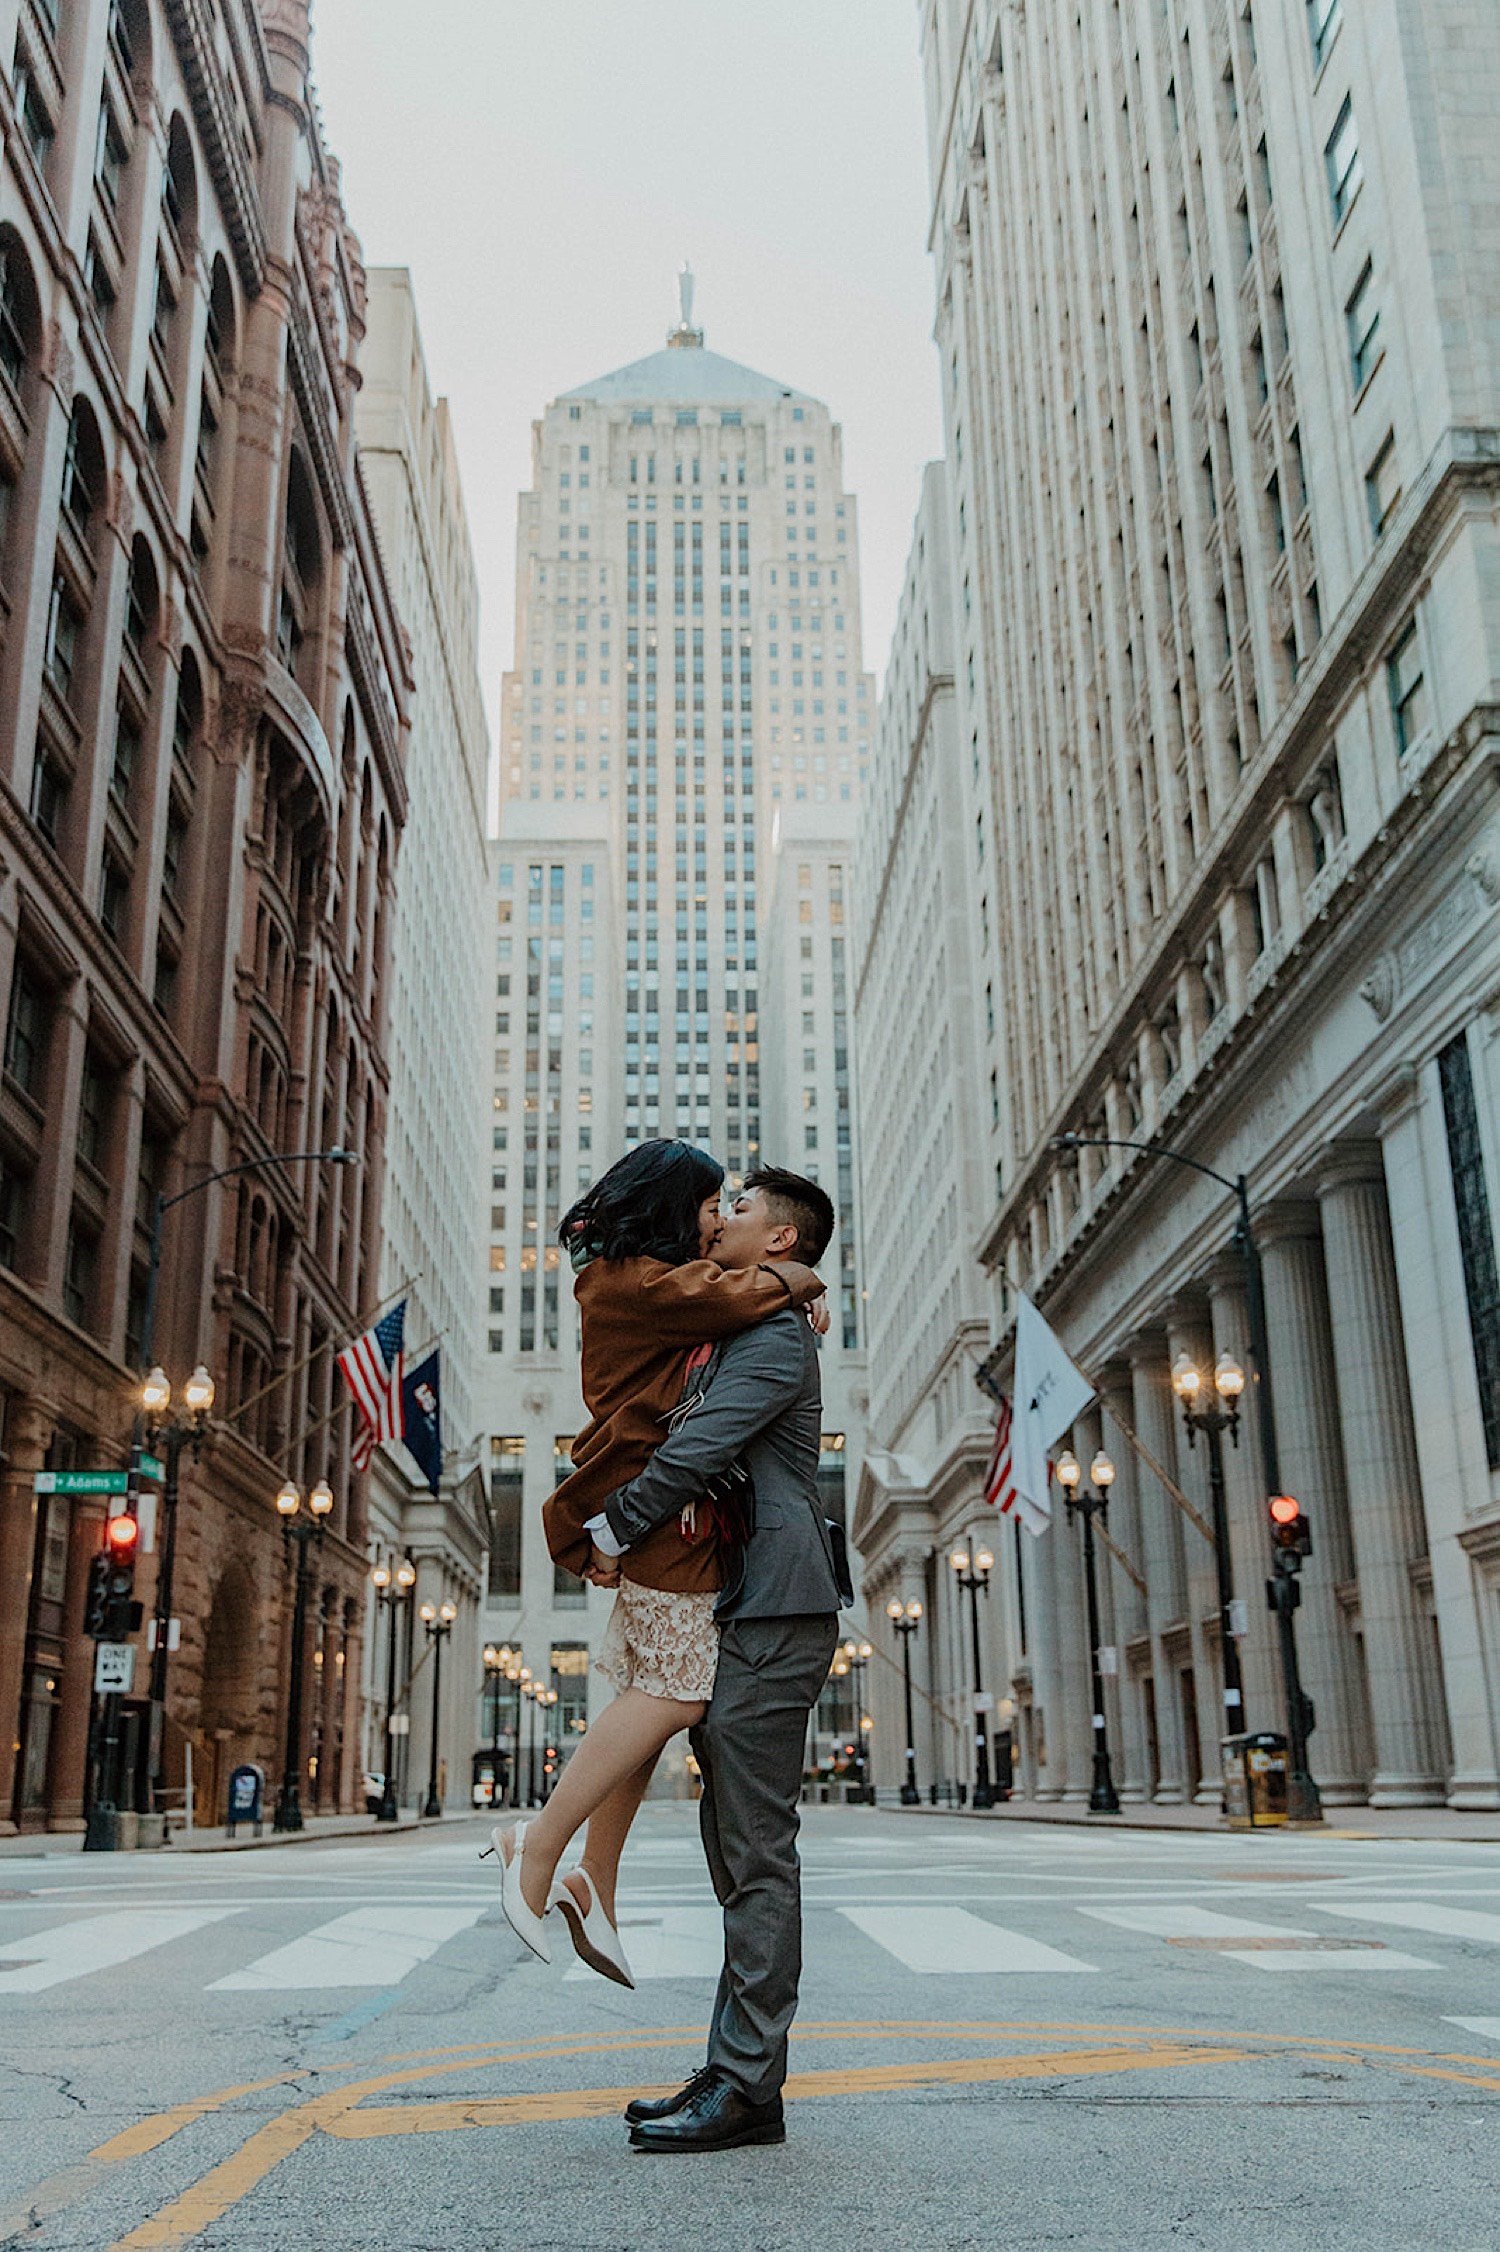 Man lifts and kisses his fiancée in the street in downtown Chicago